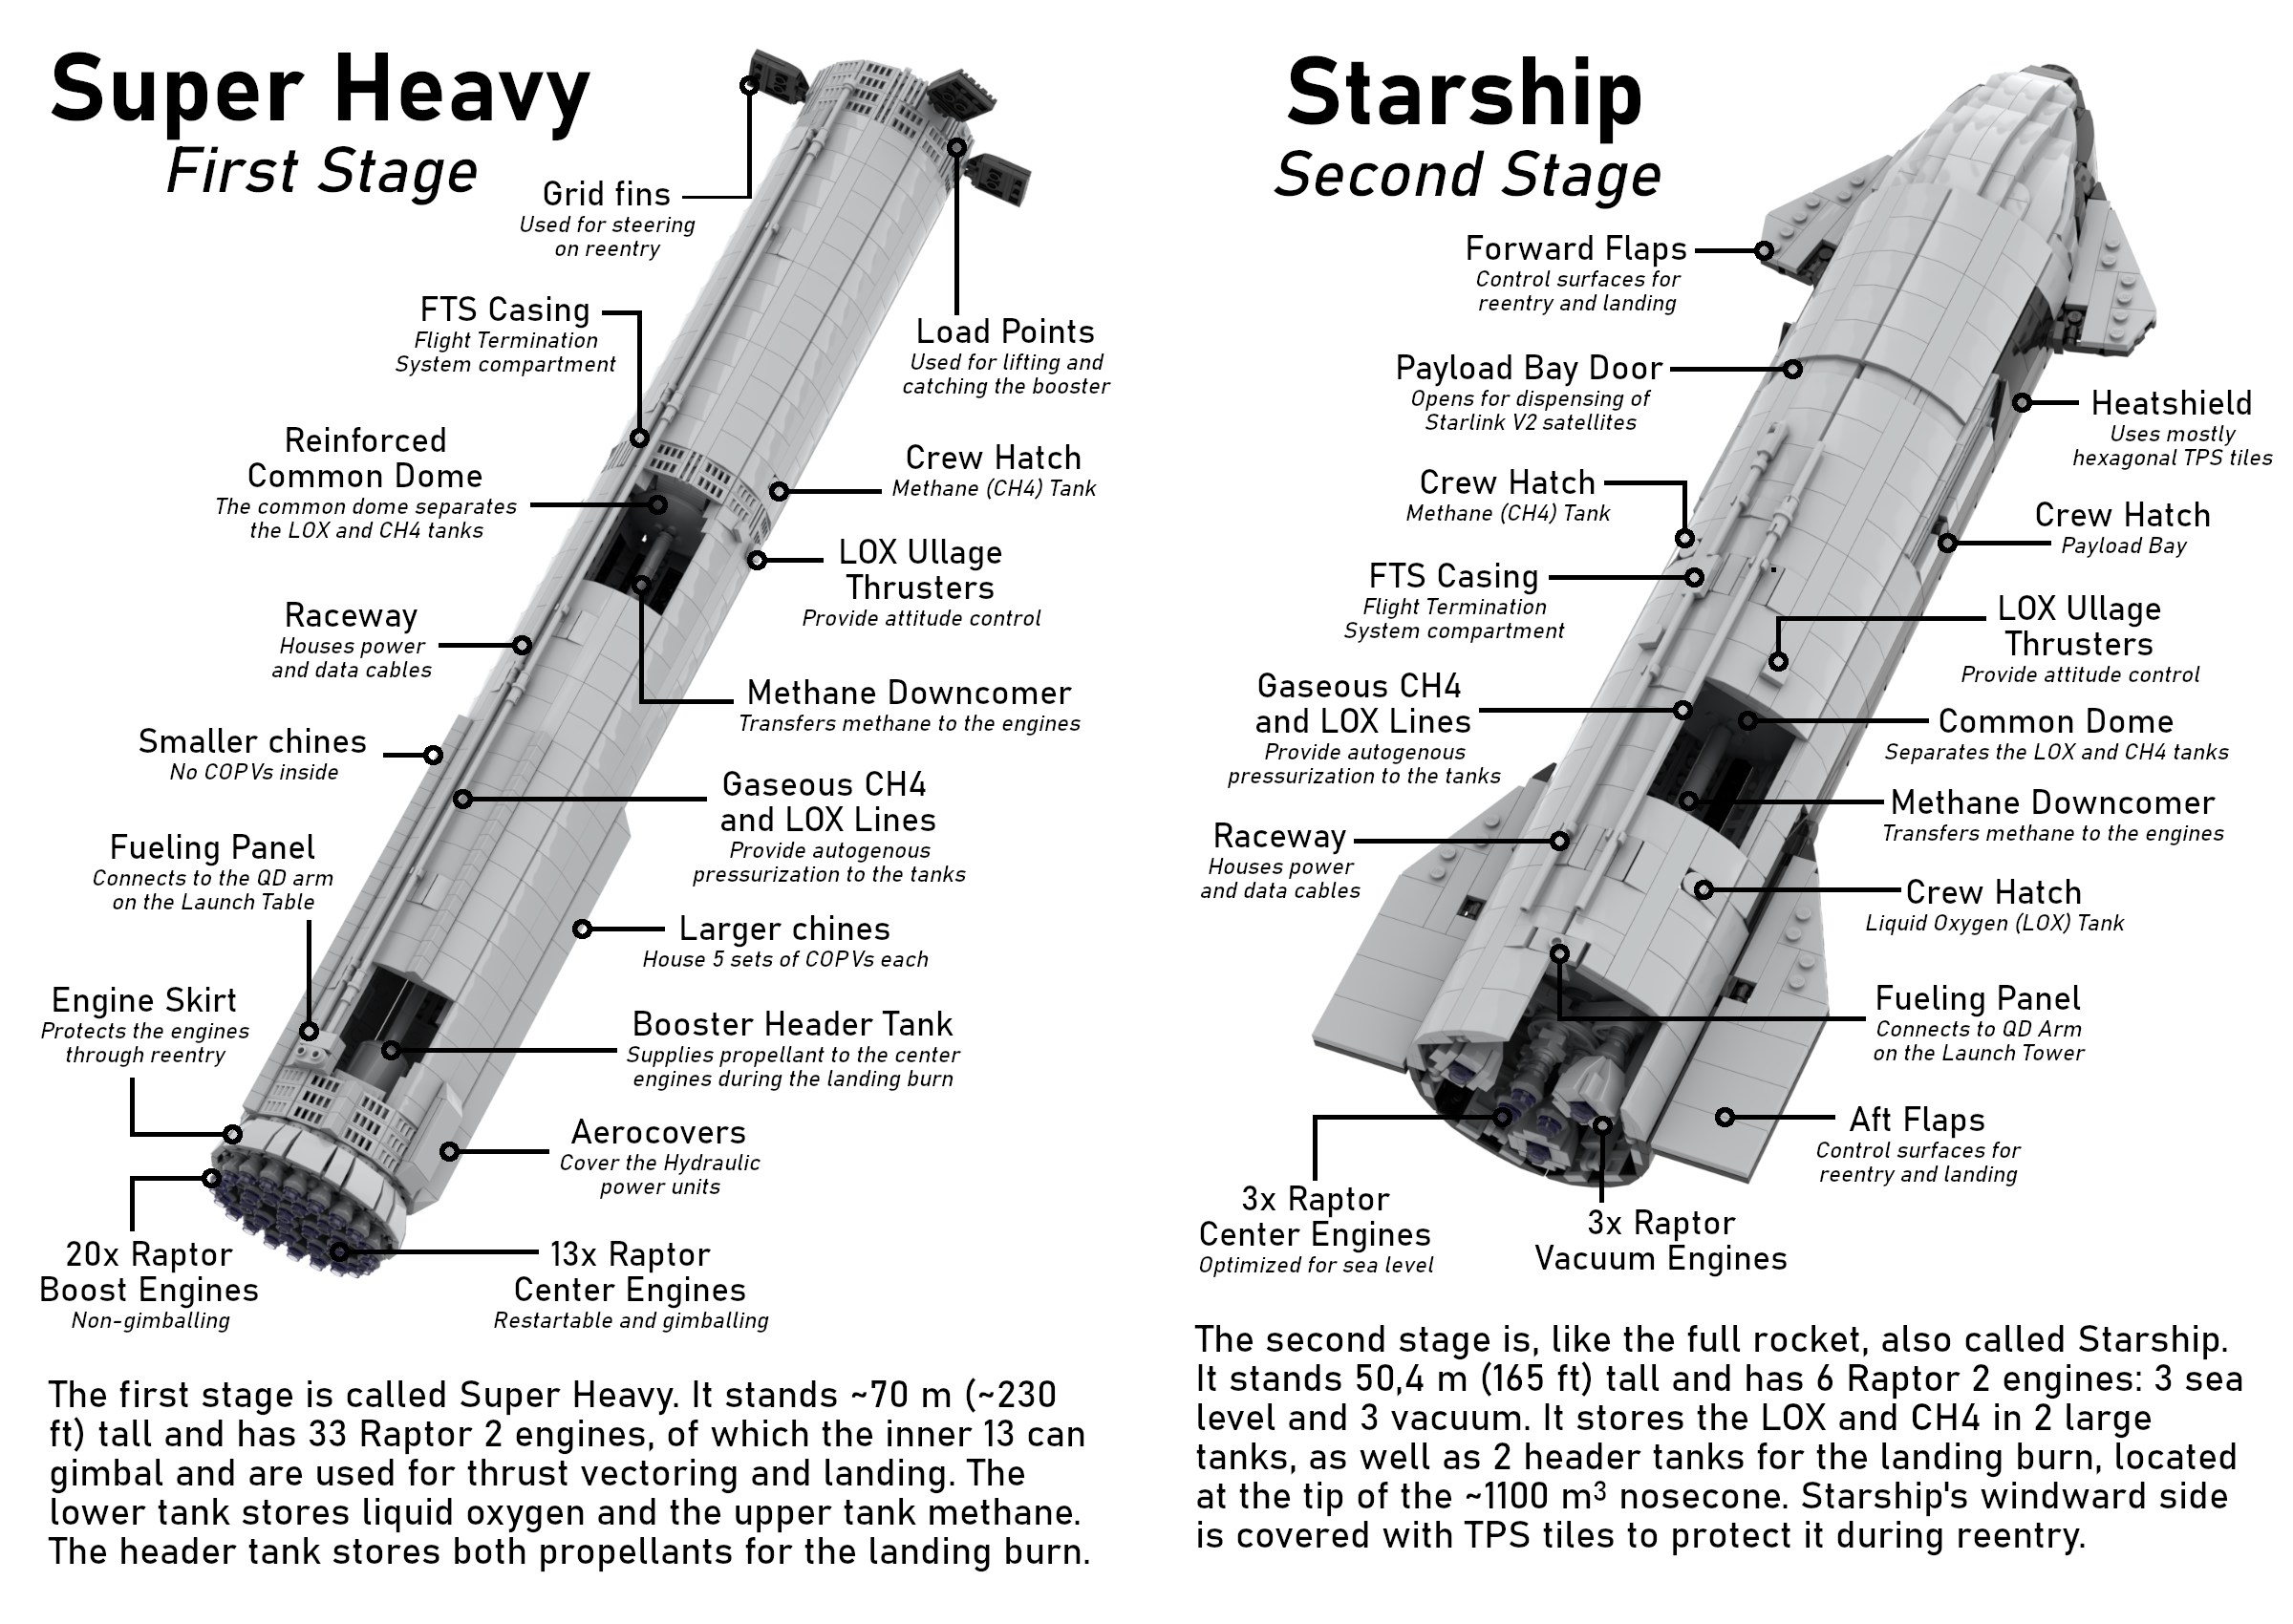 Starship & Booster 7